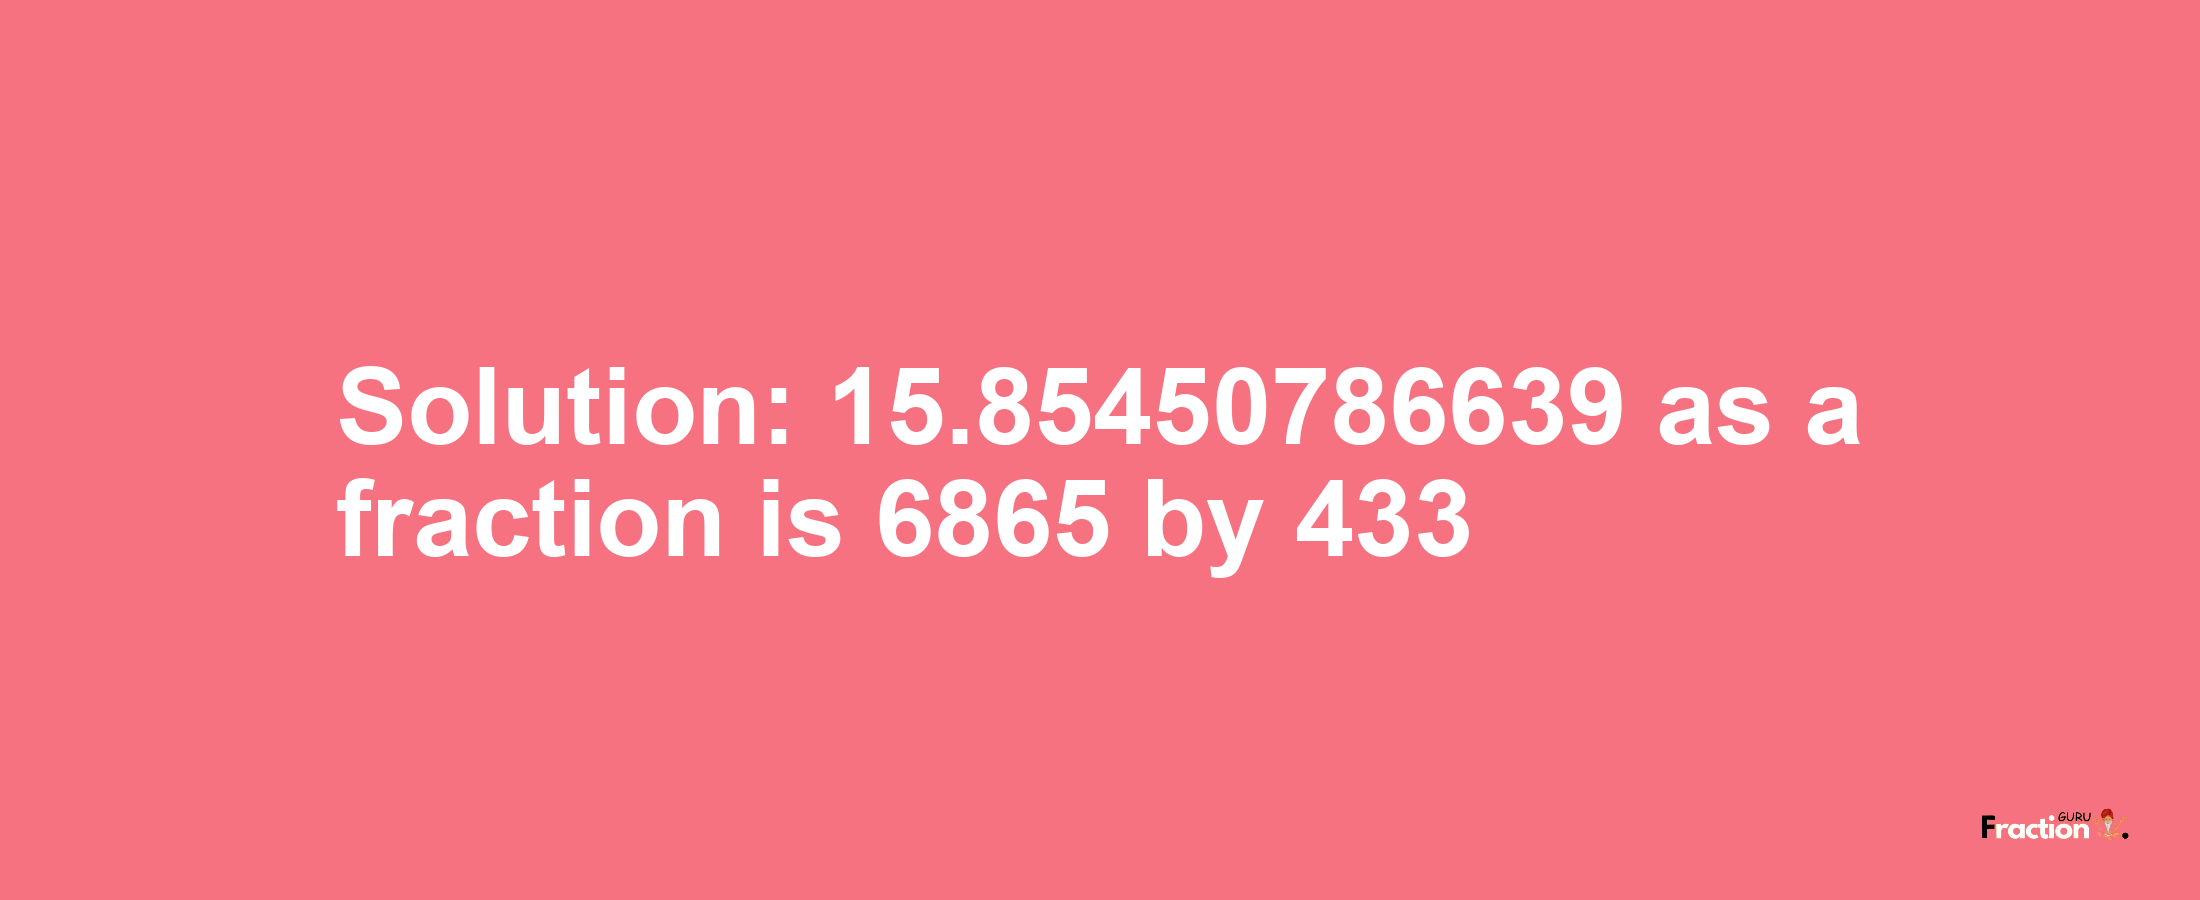 Solution:15.85450786639 as a fraction is 6865/433